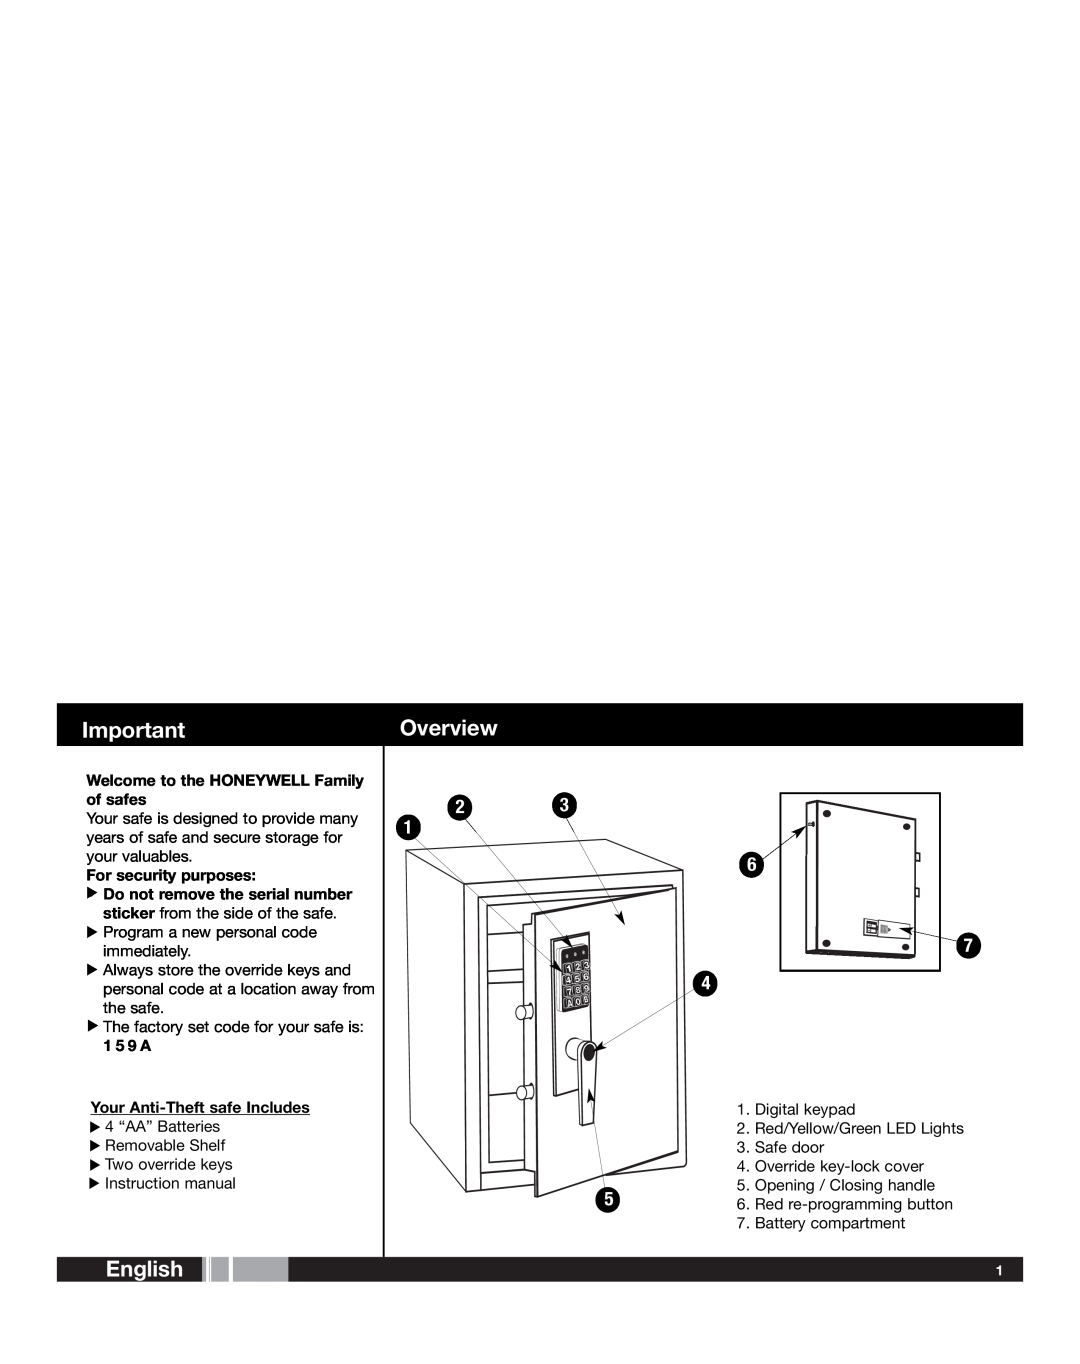 Honeywell 2077D manual Overview, English, Welcome to the HONEYWELL Family of safes, For security purposes, 1 5 9 A 